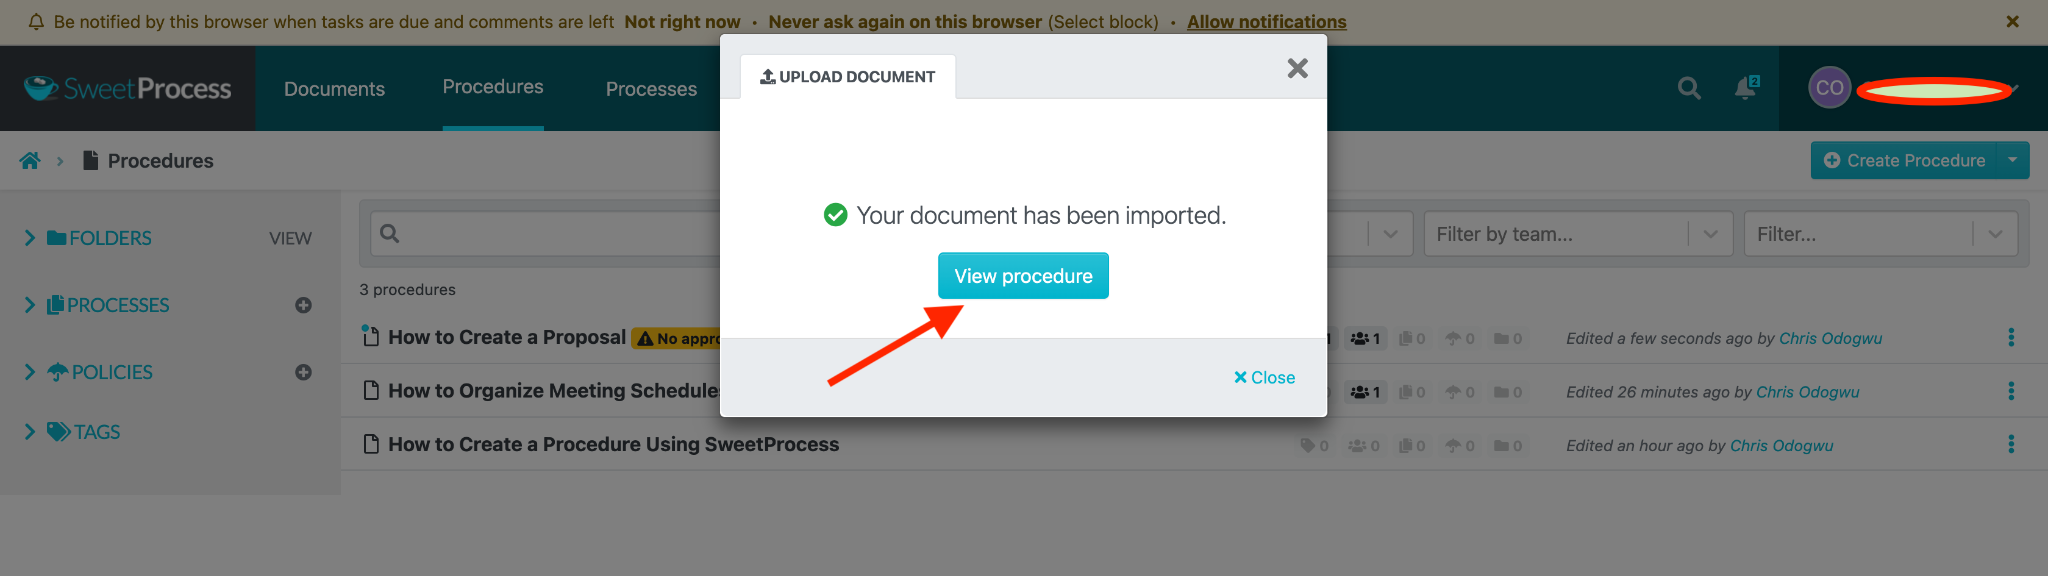 You can view the document by clicking on “View procedure” when the upload completes.